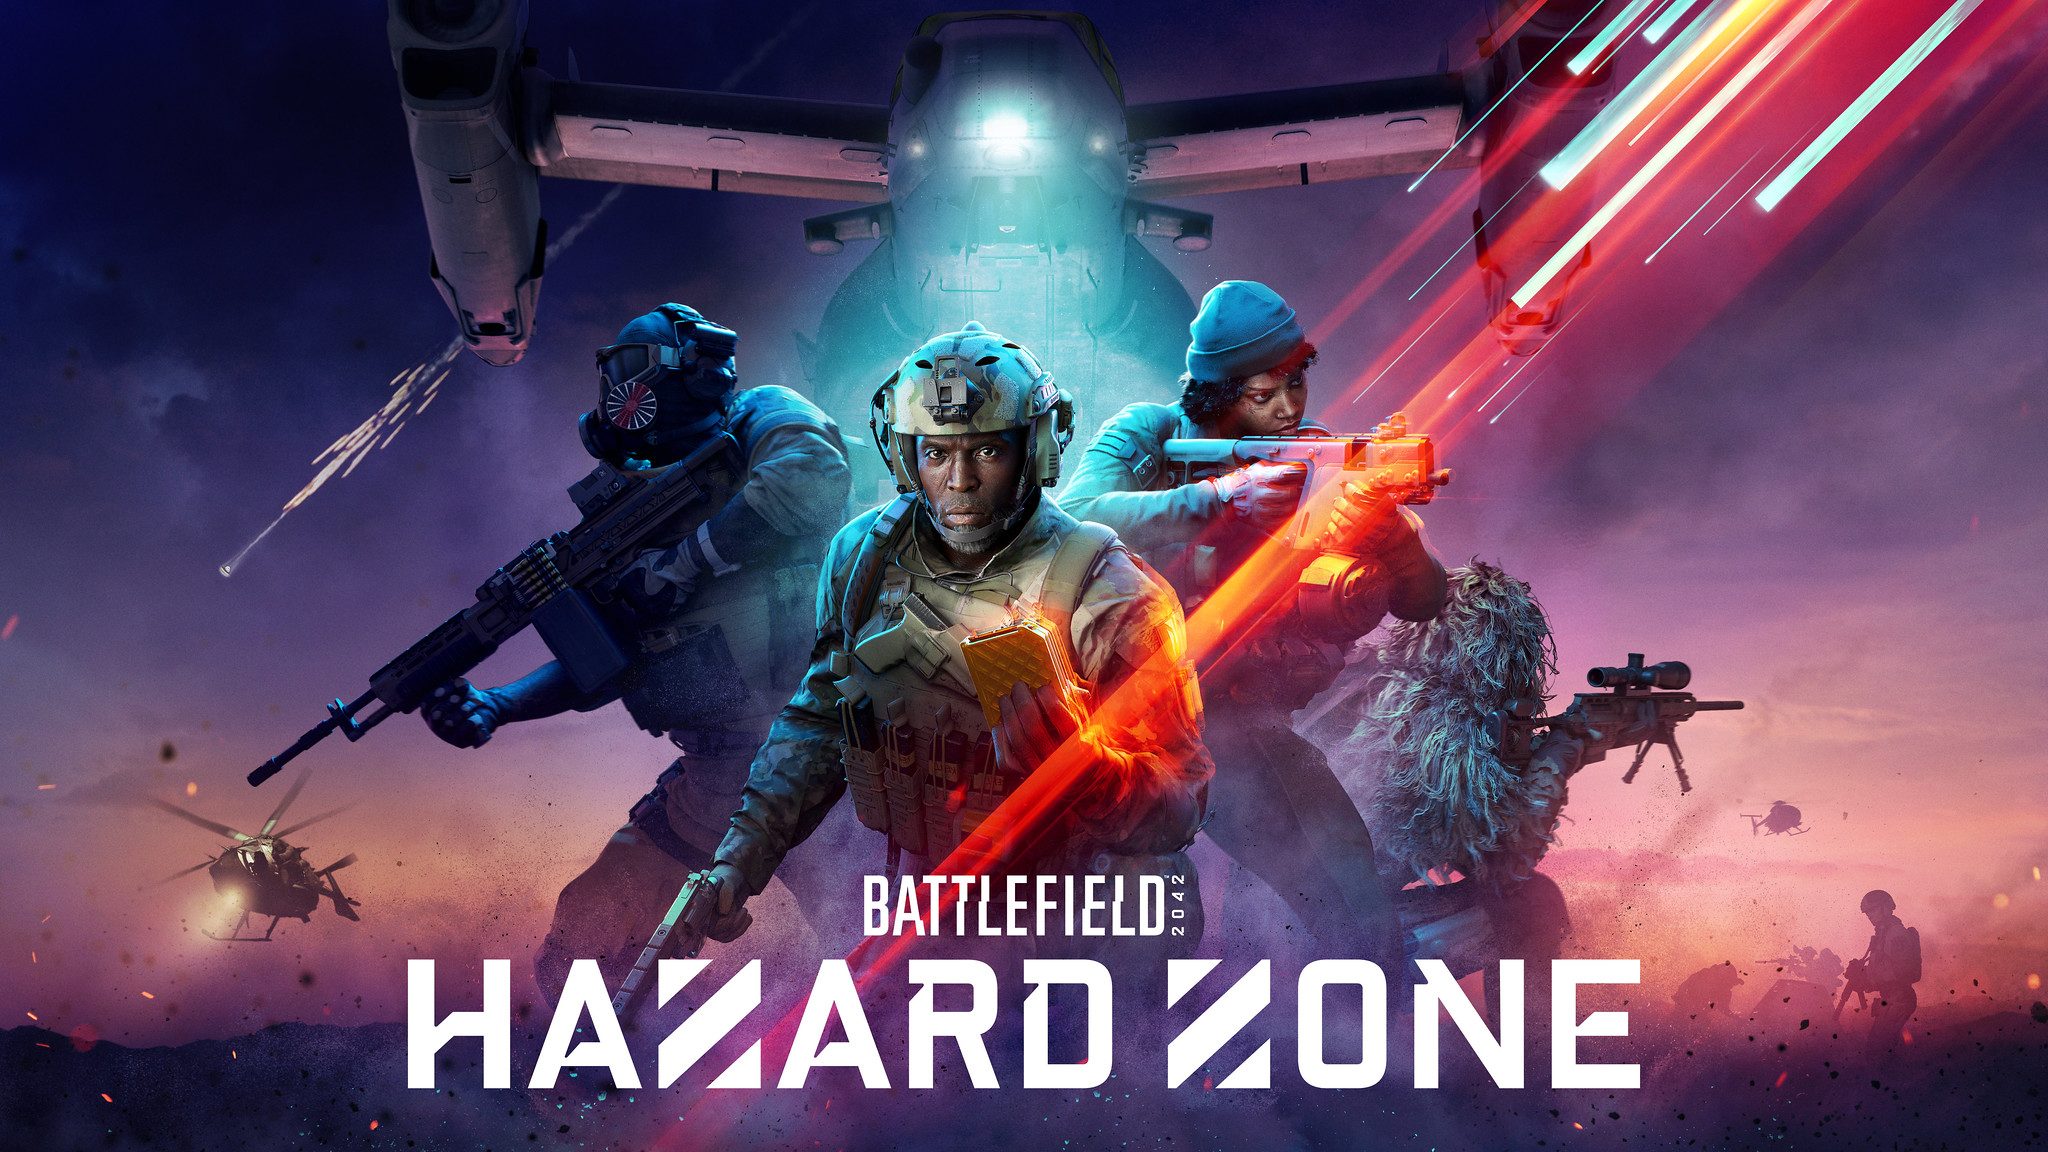 Battlefield Hazard Zone Revealed: Full Details On The New Experience For PS4 And PS5 thumbnail